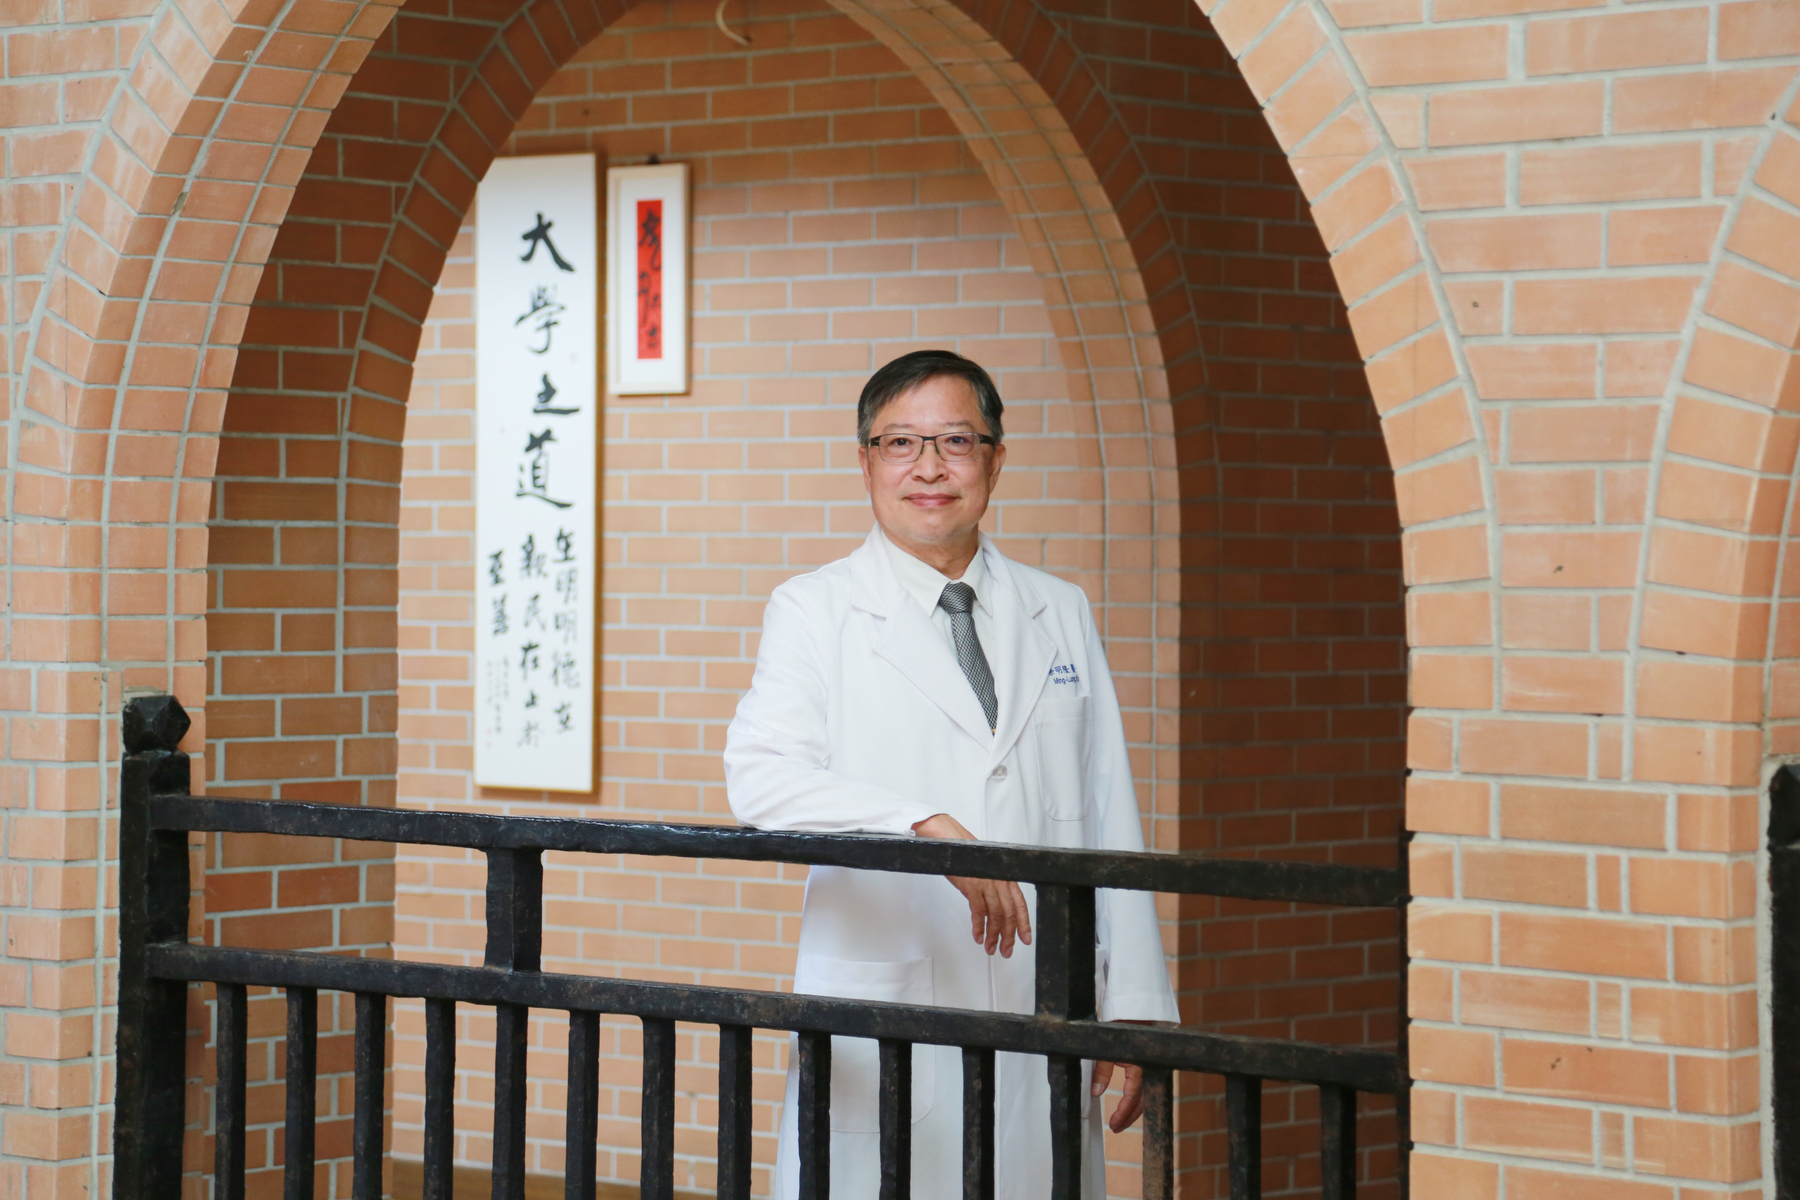 Dr. Ming-Lung Yu received delegation as National Sun Yat-sen University’s first Dean of the newly built College of Medicine